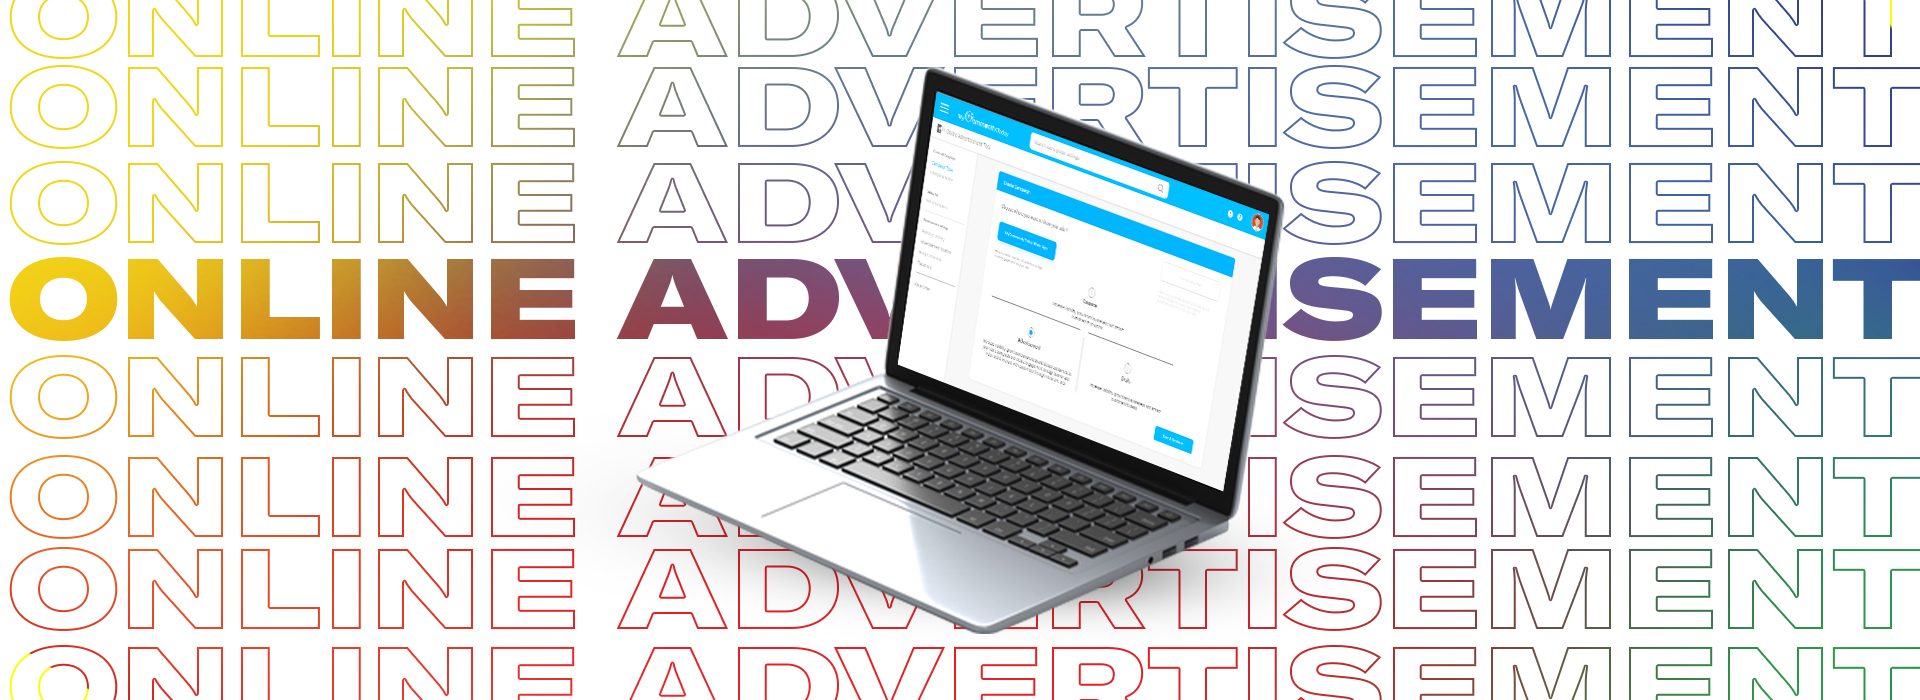 Online Advertising tool company in usa